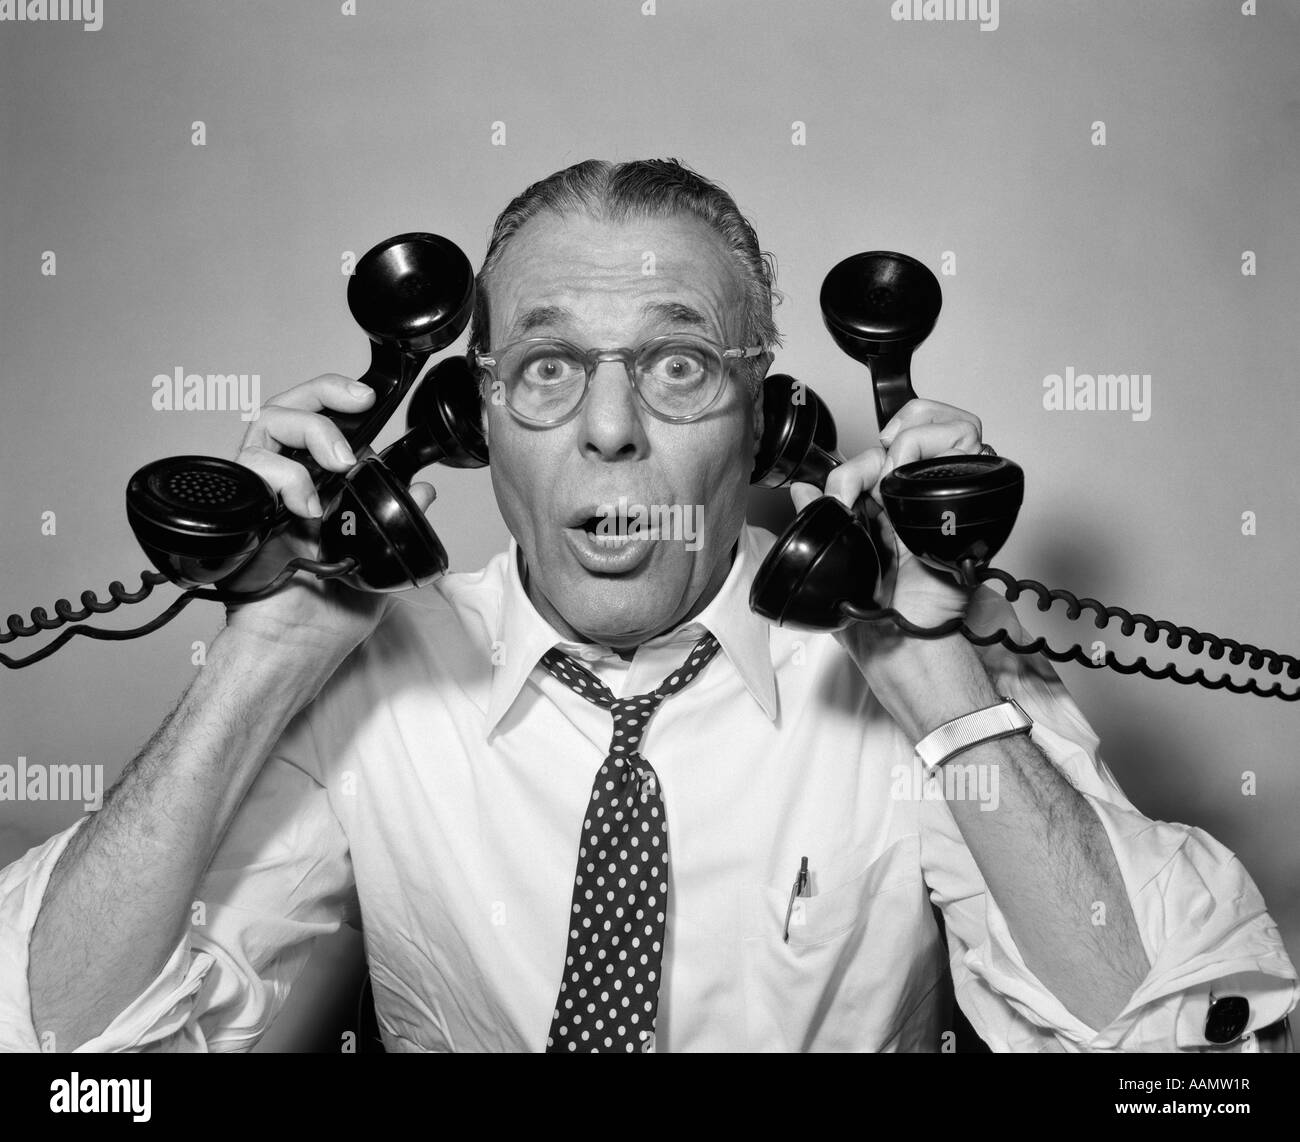 1950s MAN WITH GLASSES HOLDING FOUR BLACK TELEPHONES LOOKING AT CAMERA WITH FUNNY FACIAL EXPRESSION Stock Photo